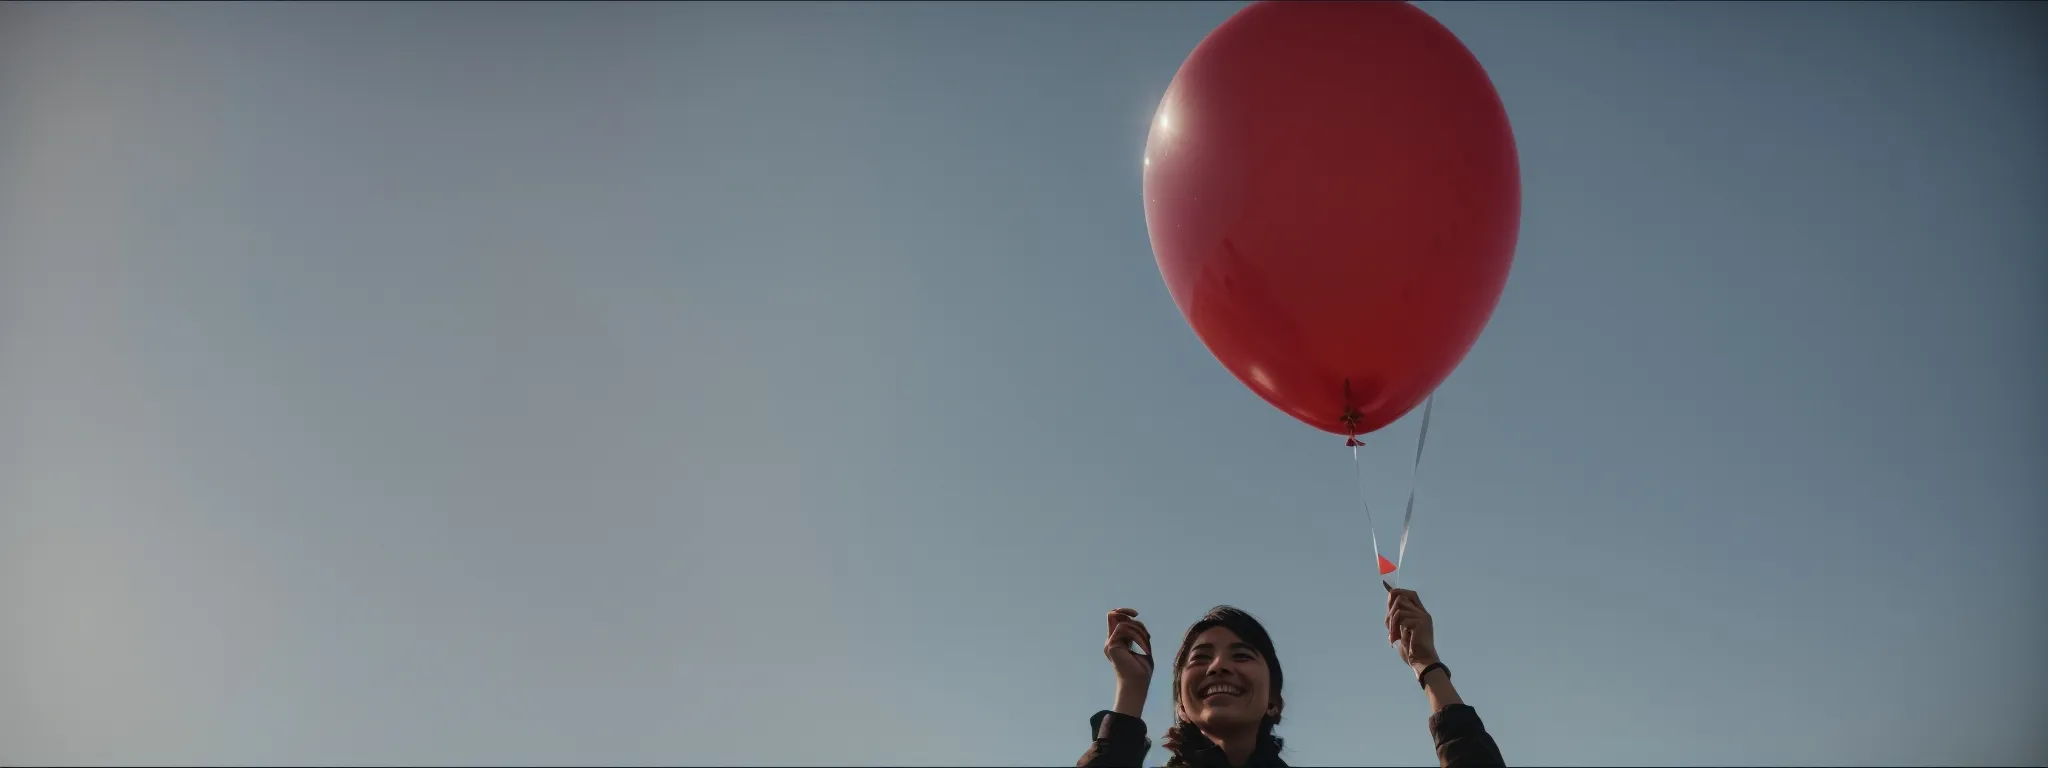 a smiling person holding a five-star shaped balloon against a bright, sunny sky.